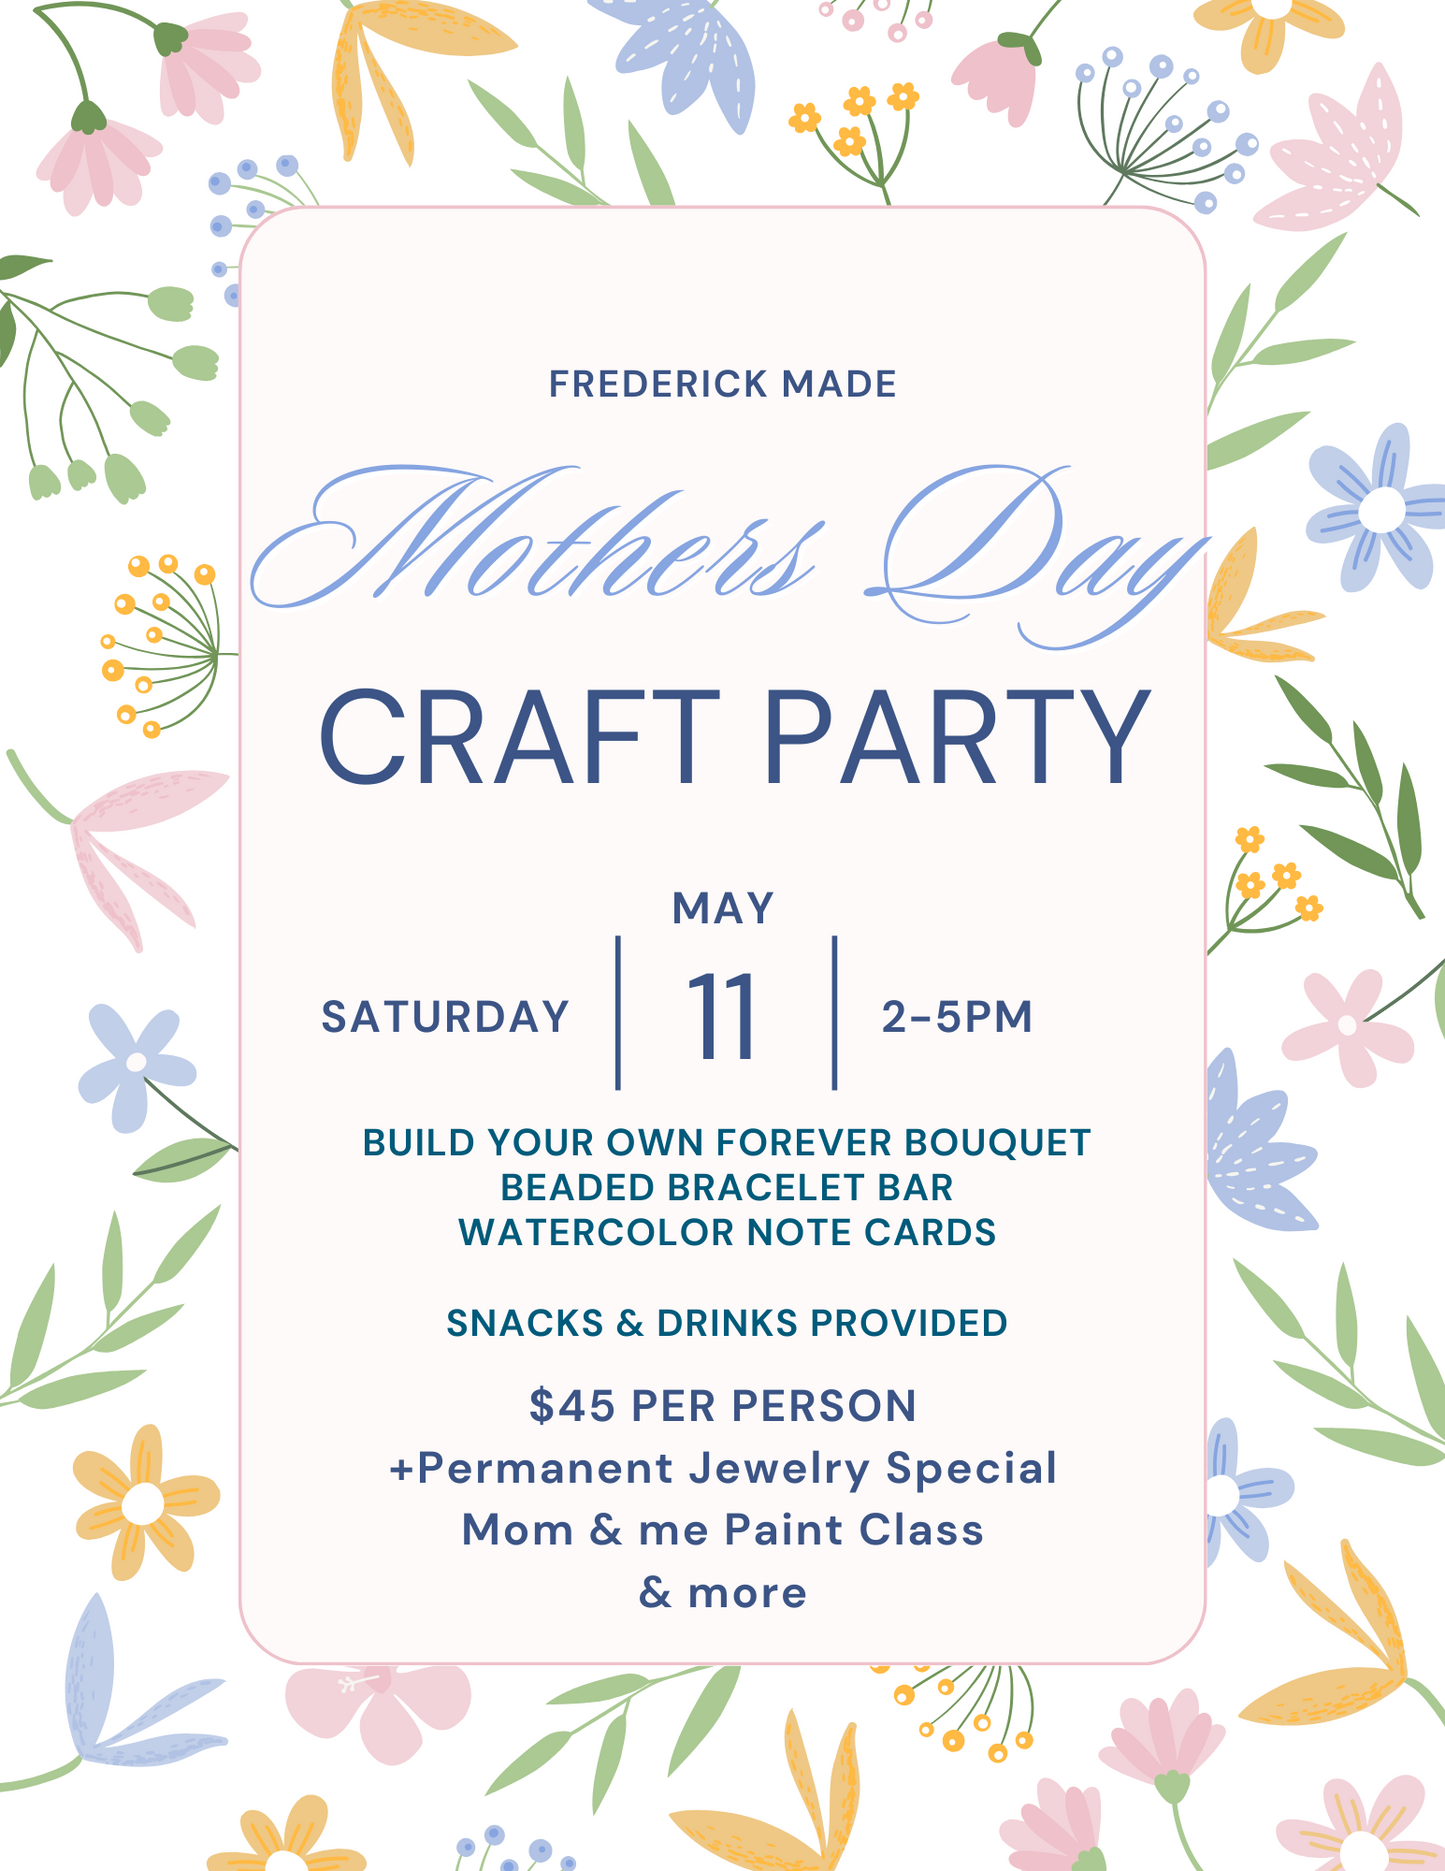 Mothers Day Craft Party - May 11